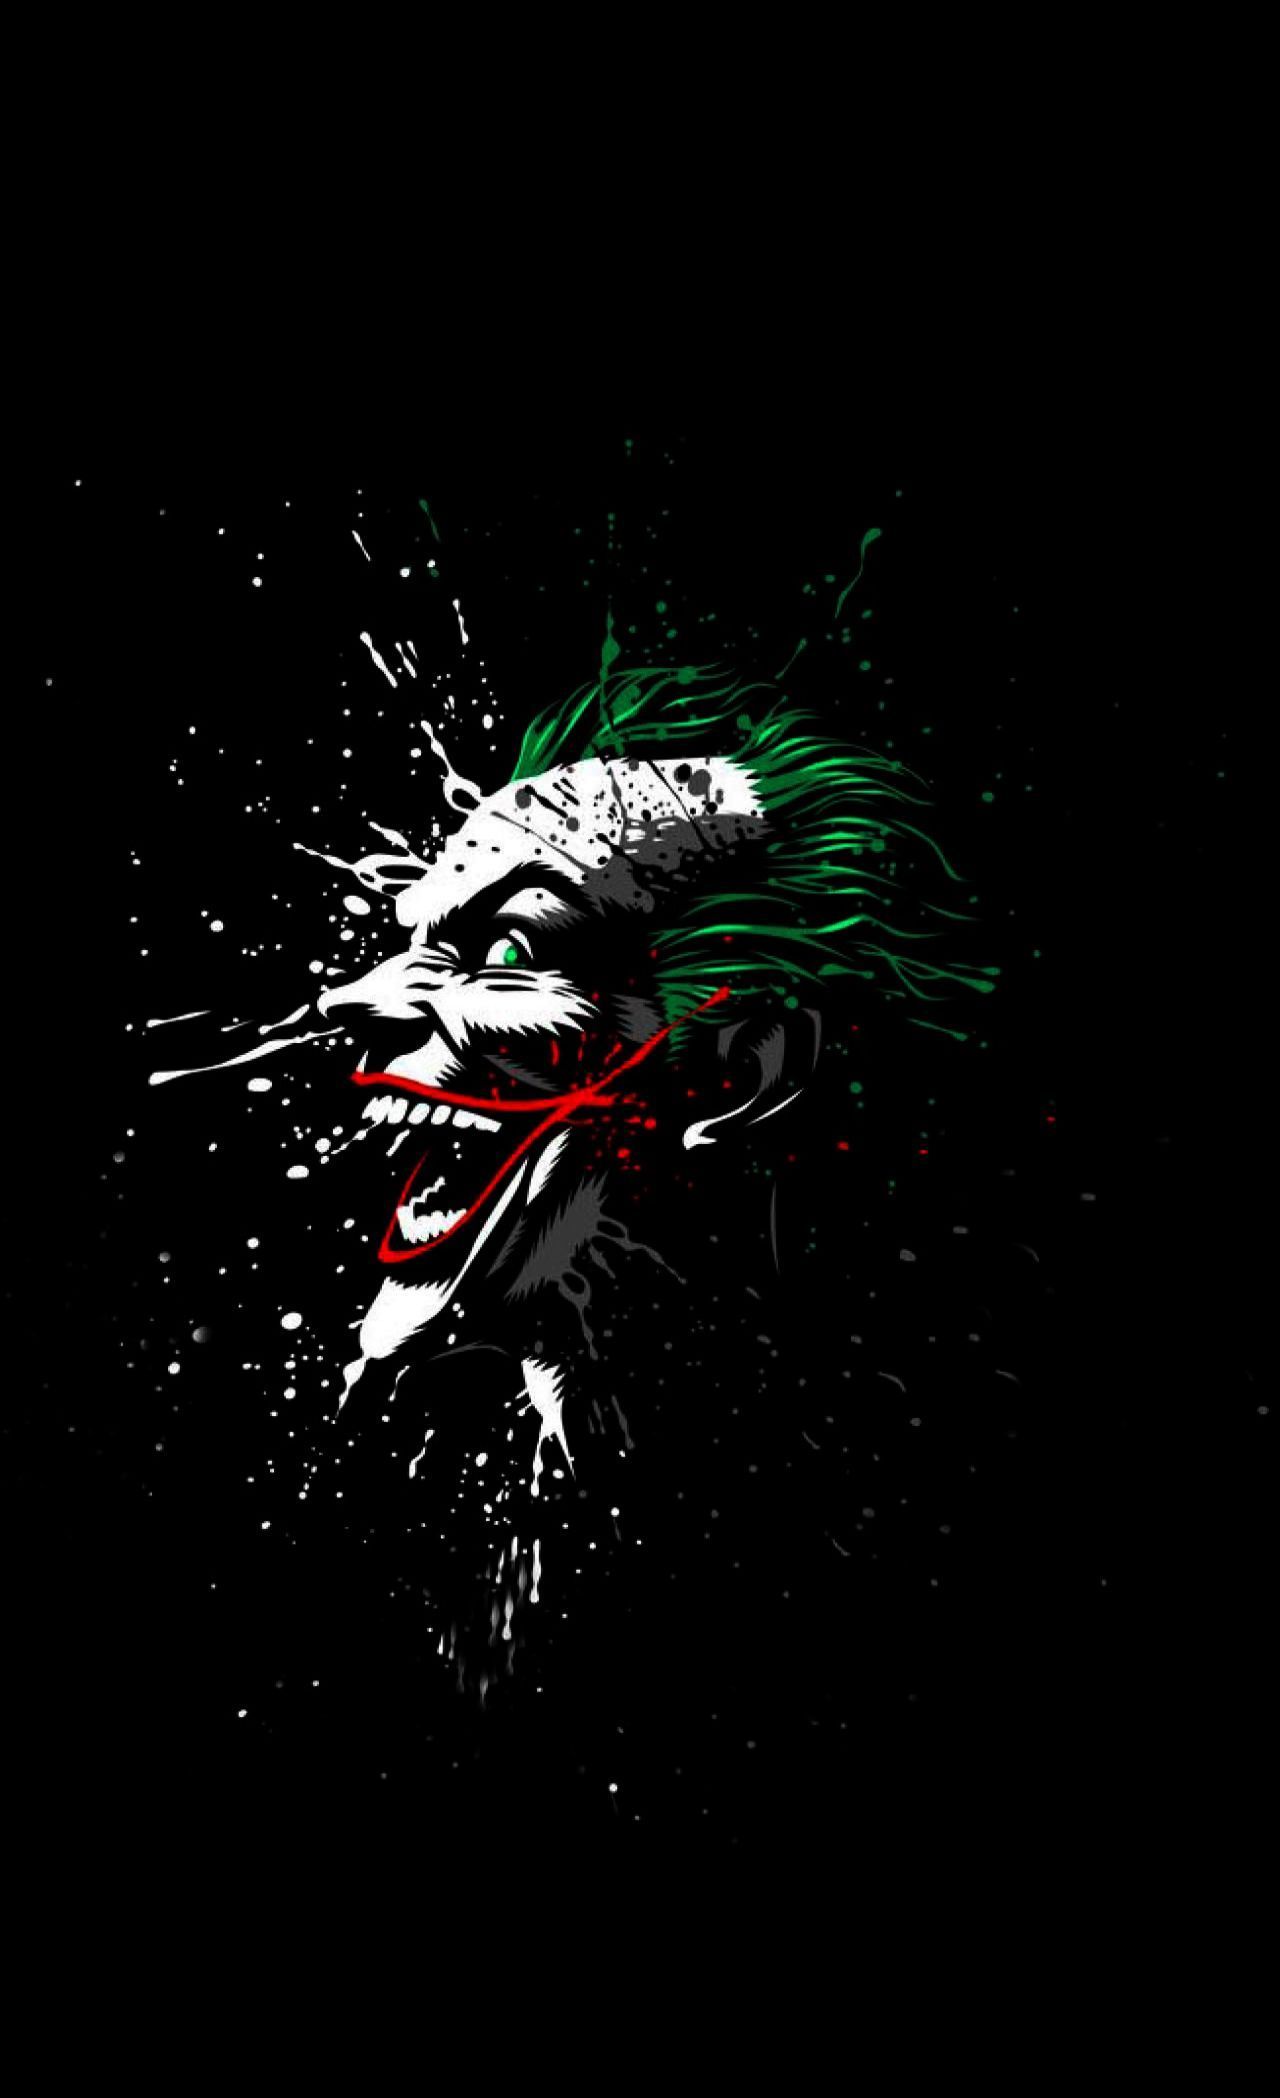 Gadgets For Geeks Dad against Love Wallpaper For iPhone Wallpaper For iPhone Girly. Joker artwork, Joker HD wallpaper, Joker iphone wallpaper